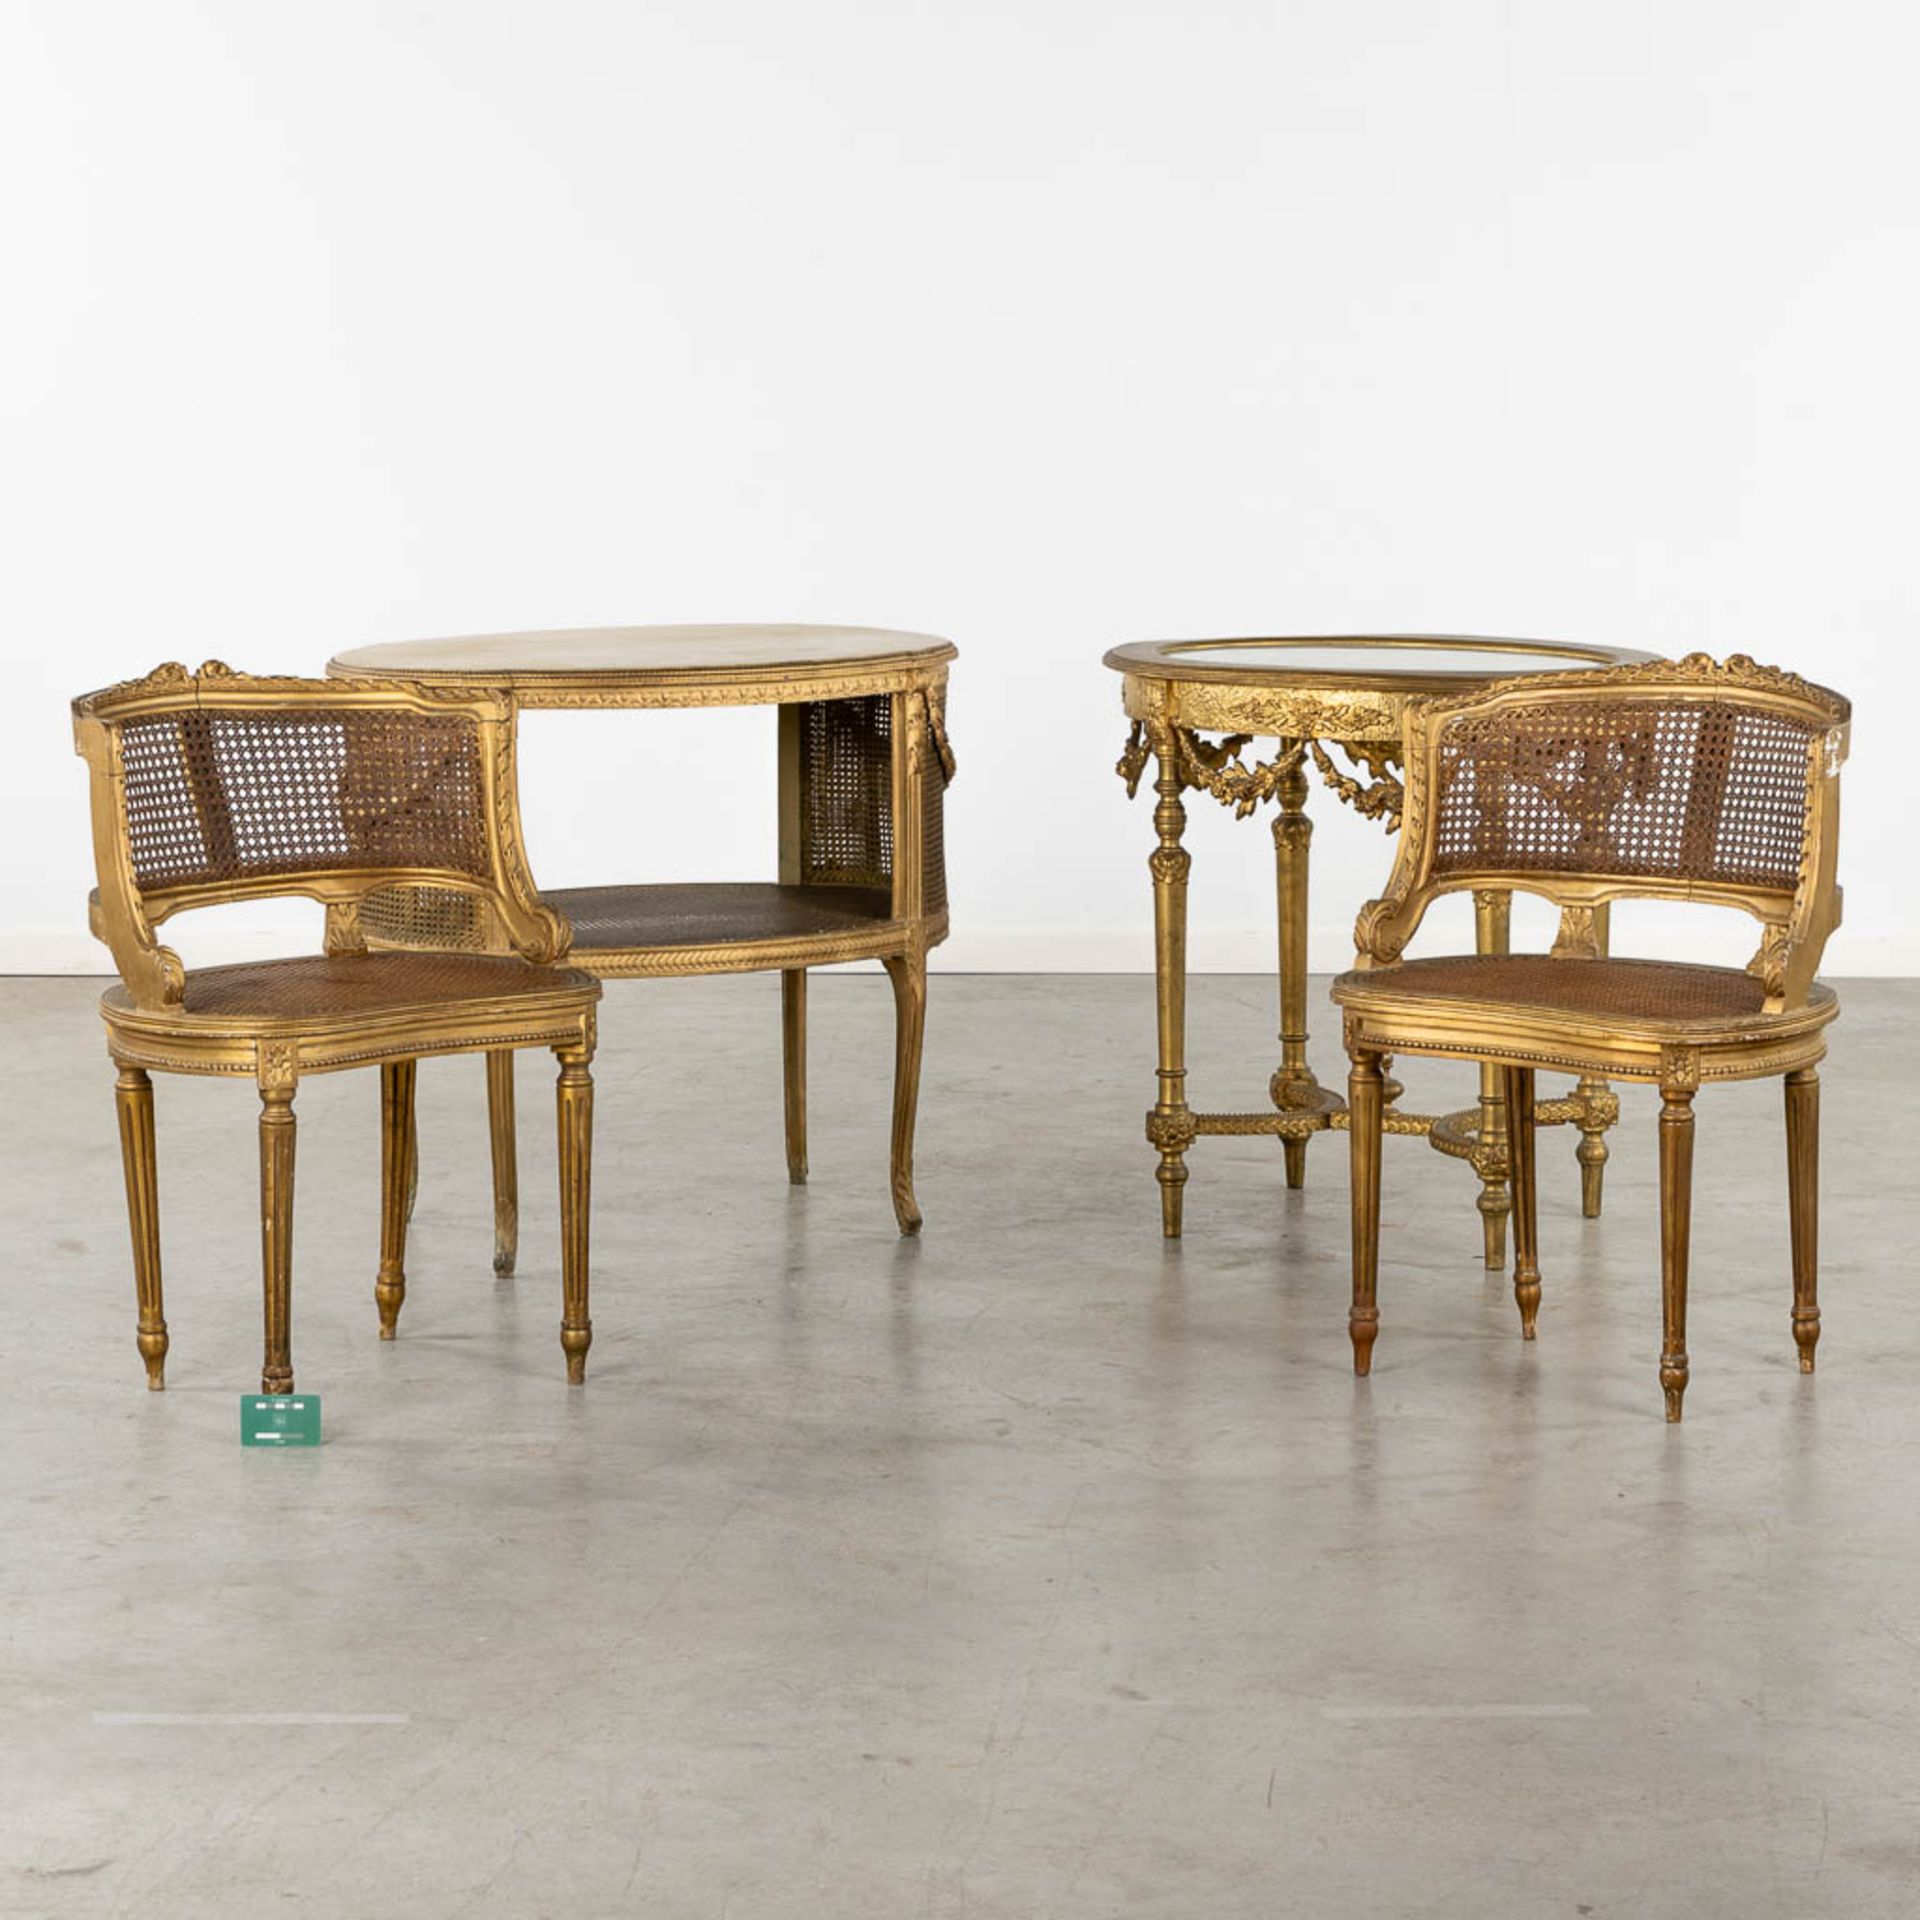 Two side tables, Two chairs, sculptured wood in Louis XVI style. Circa 1900. (L:57 x W:81 x H:75 cm) - Bild 2 aus 18